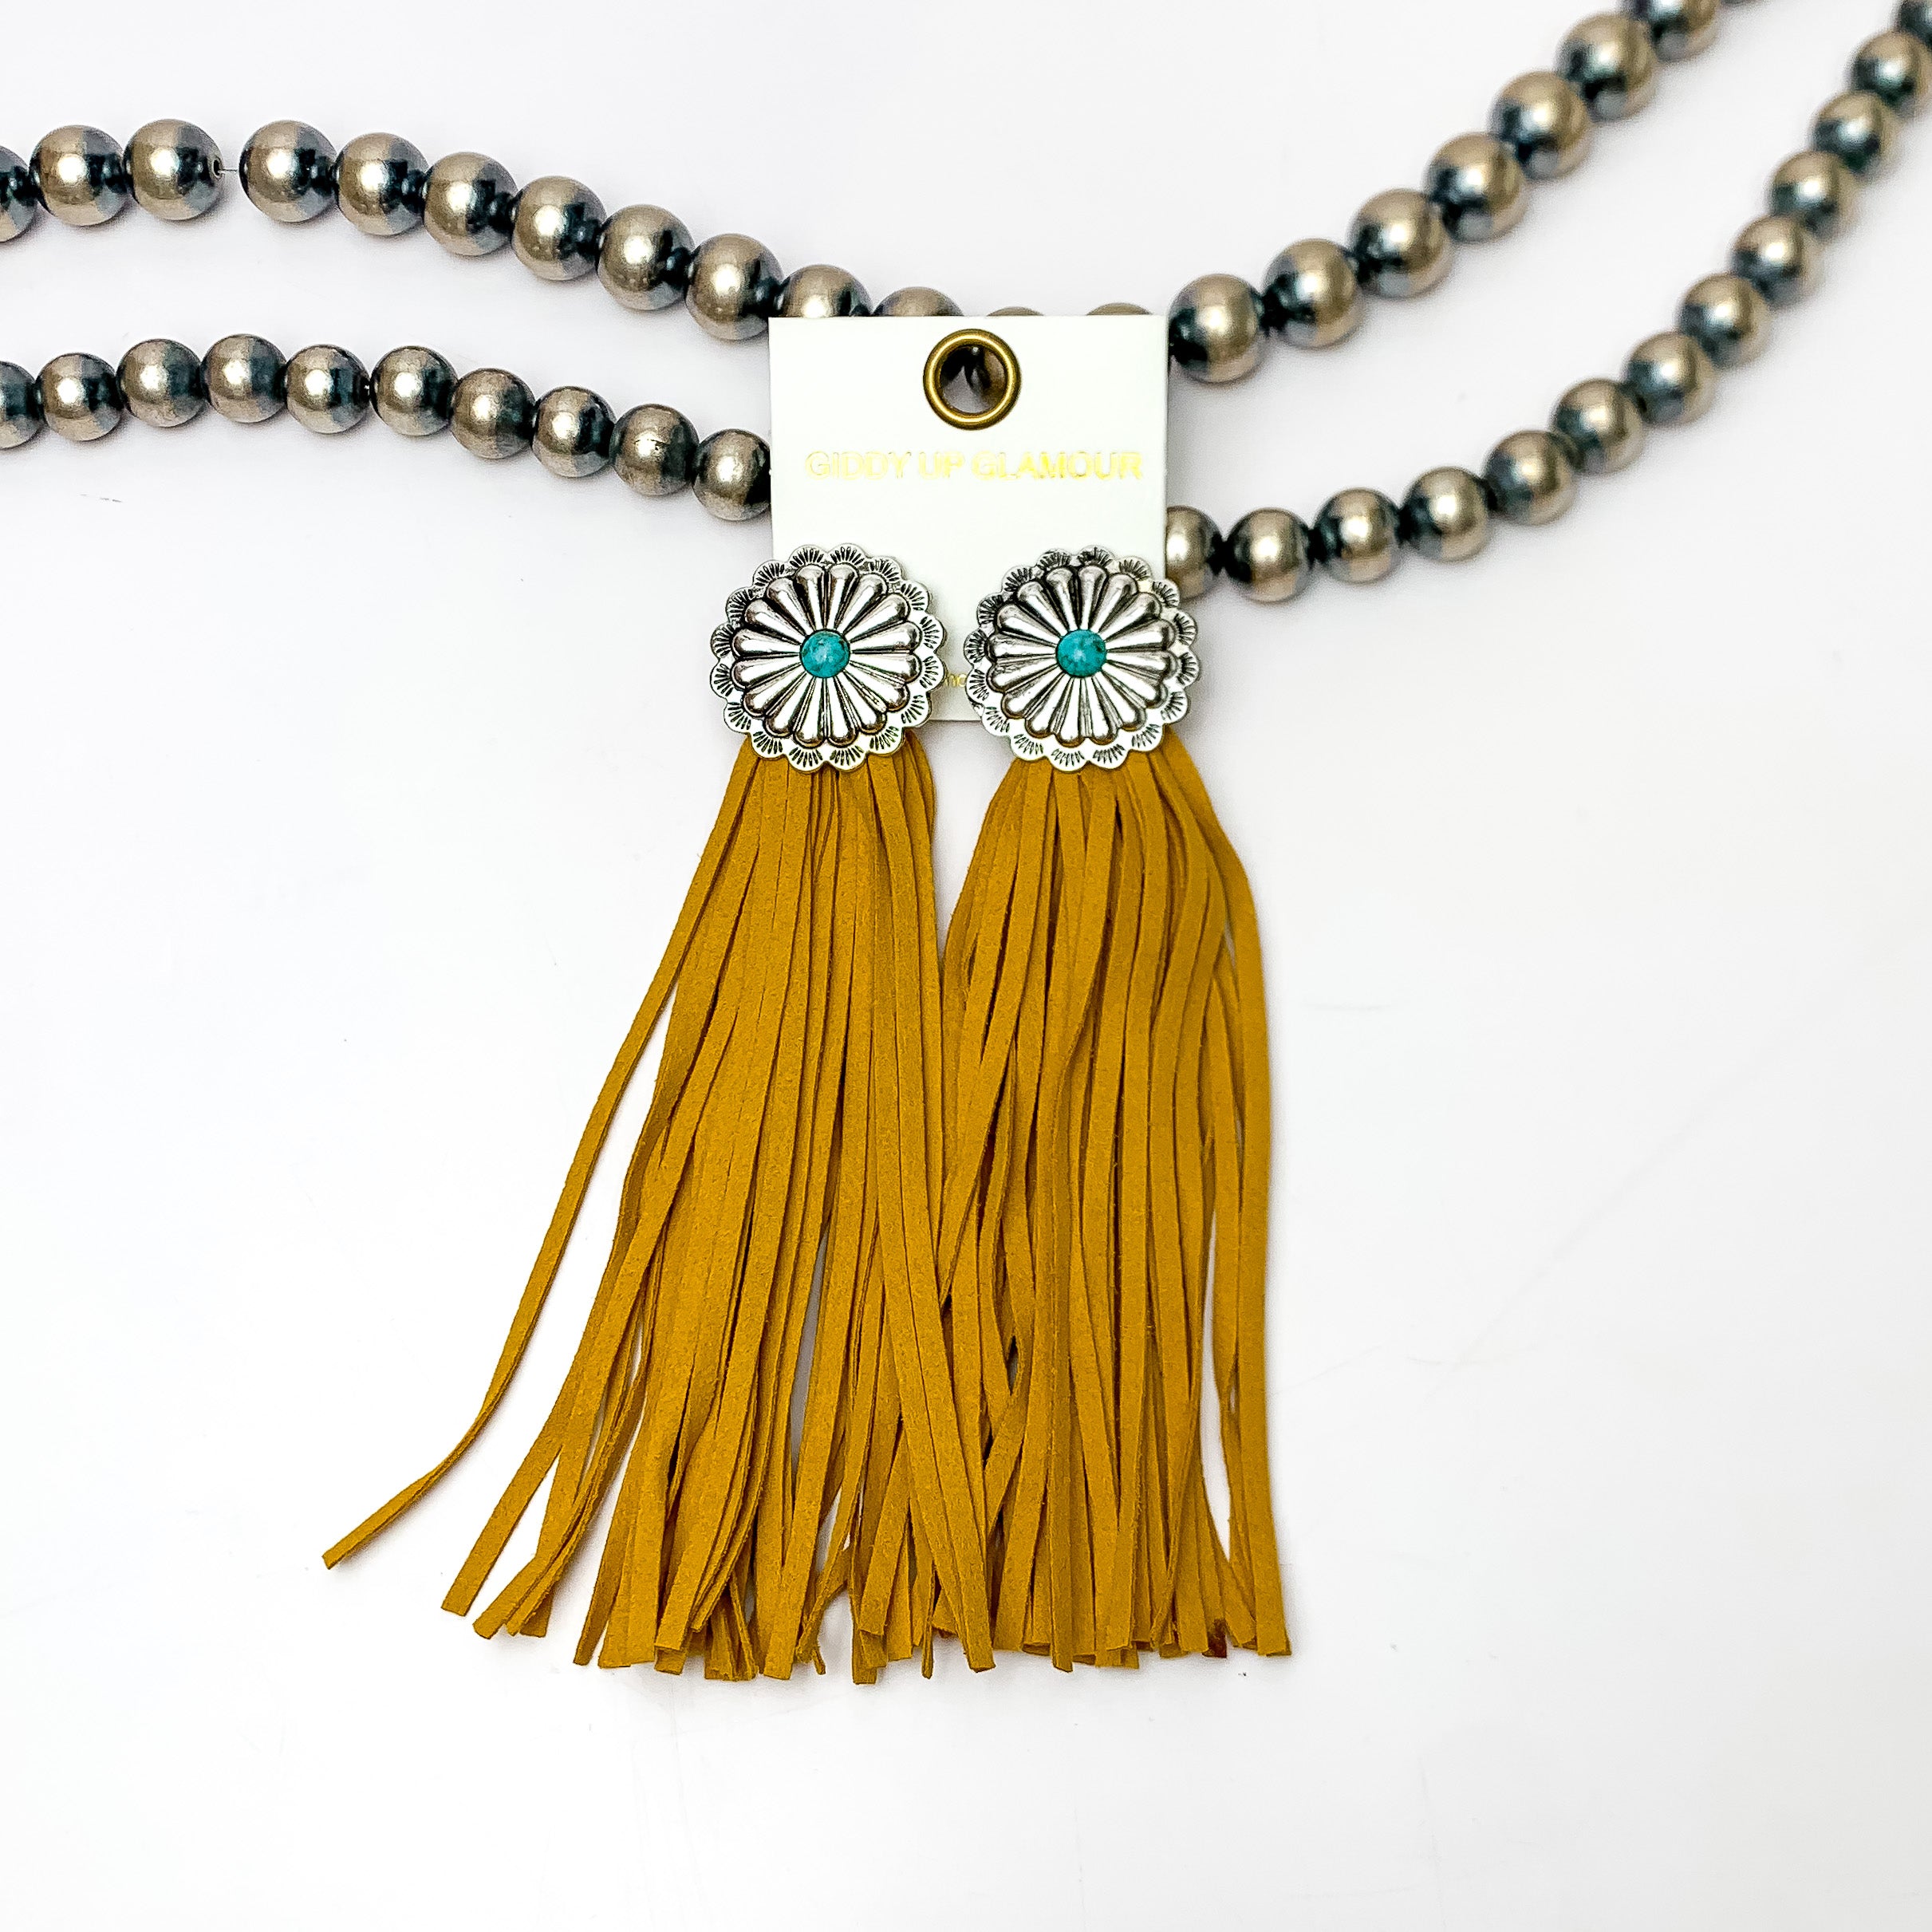 Rodeo Runway Tassel Earrings in Yellow. These tassel earrings are pictured on white background with them laying on Navajo peals.